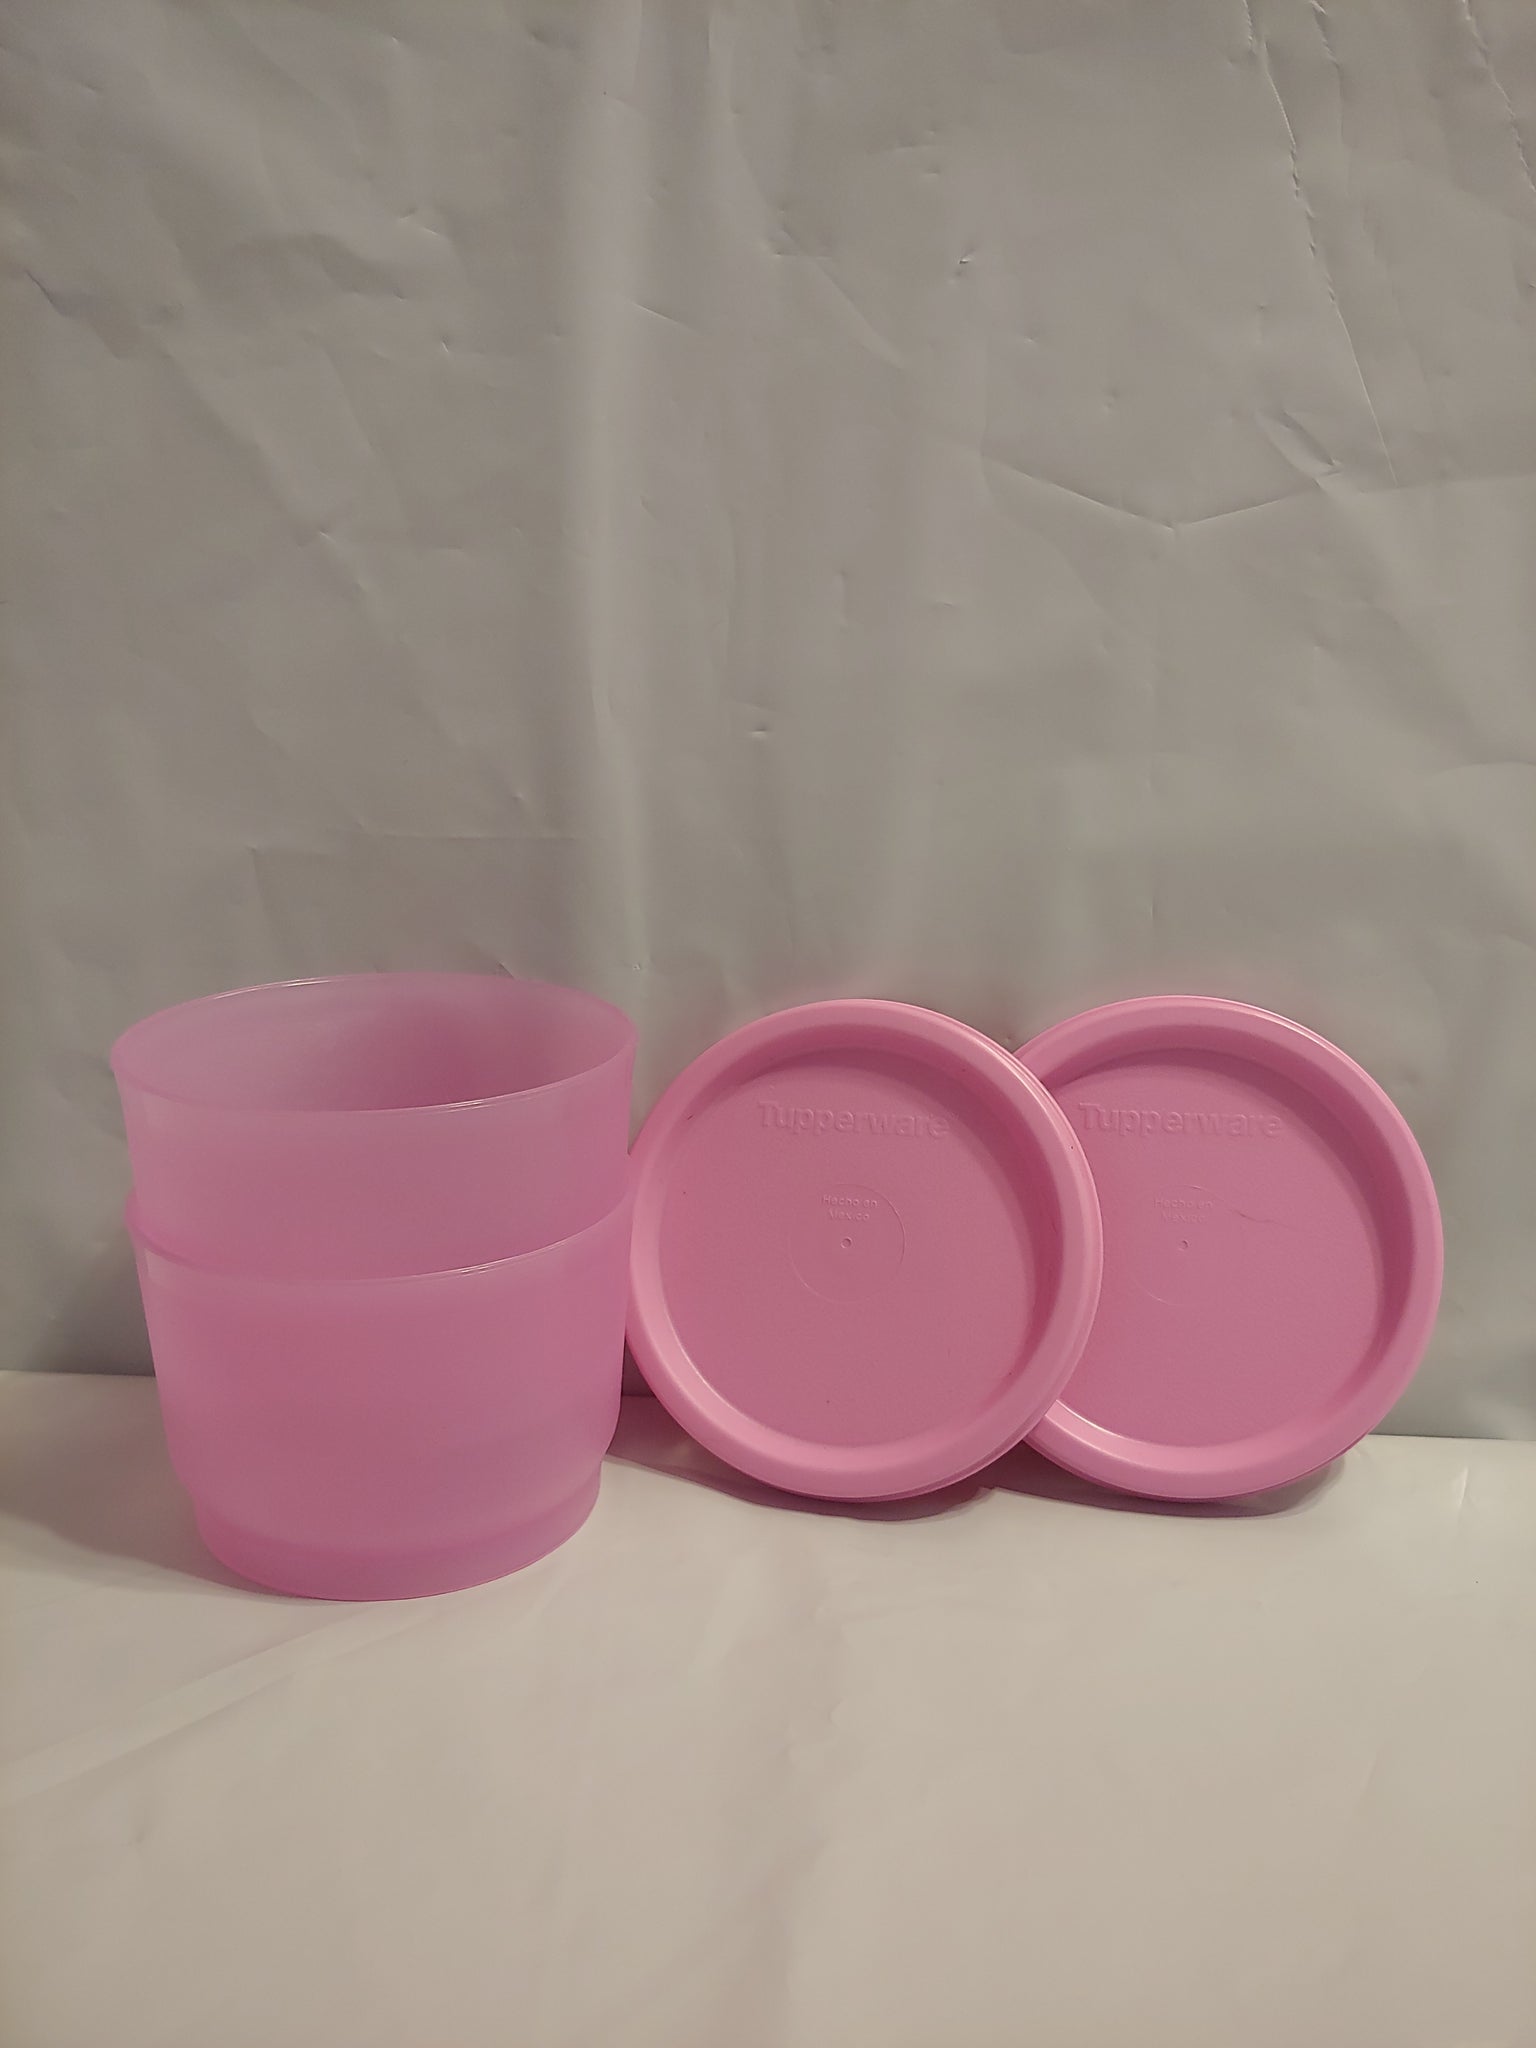 TUPPERWARE Set of 2 - 4-oz Snack Cups Bowls w/ Round Seals PINK FROSTING ~ PINK SEAL